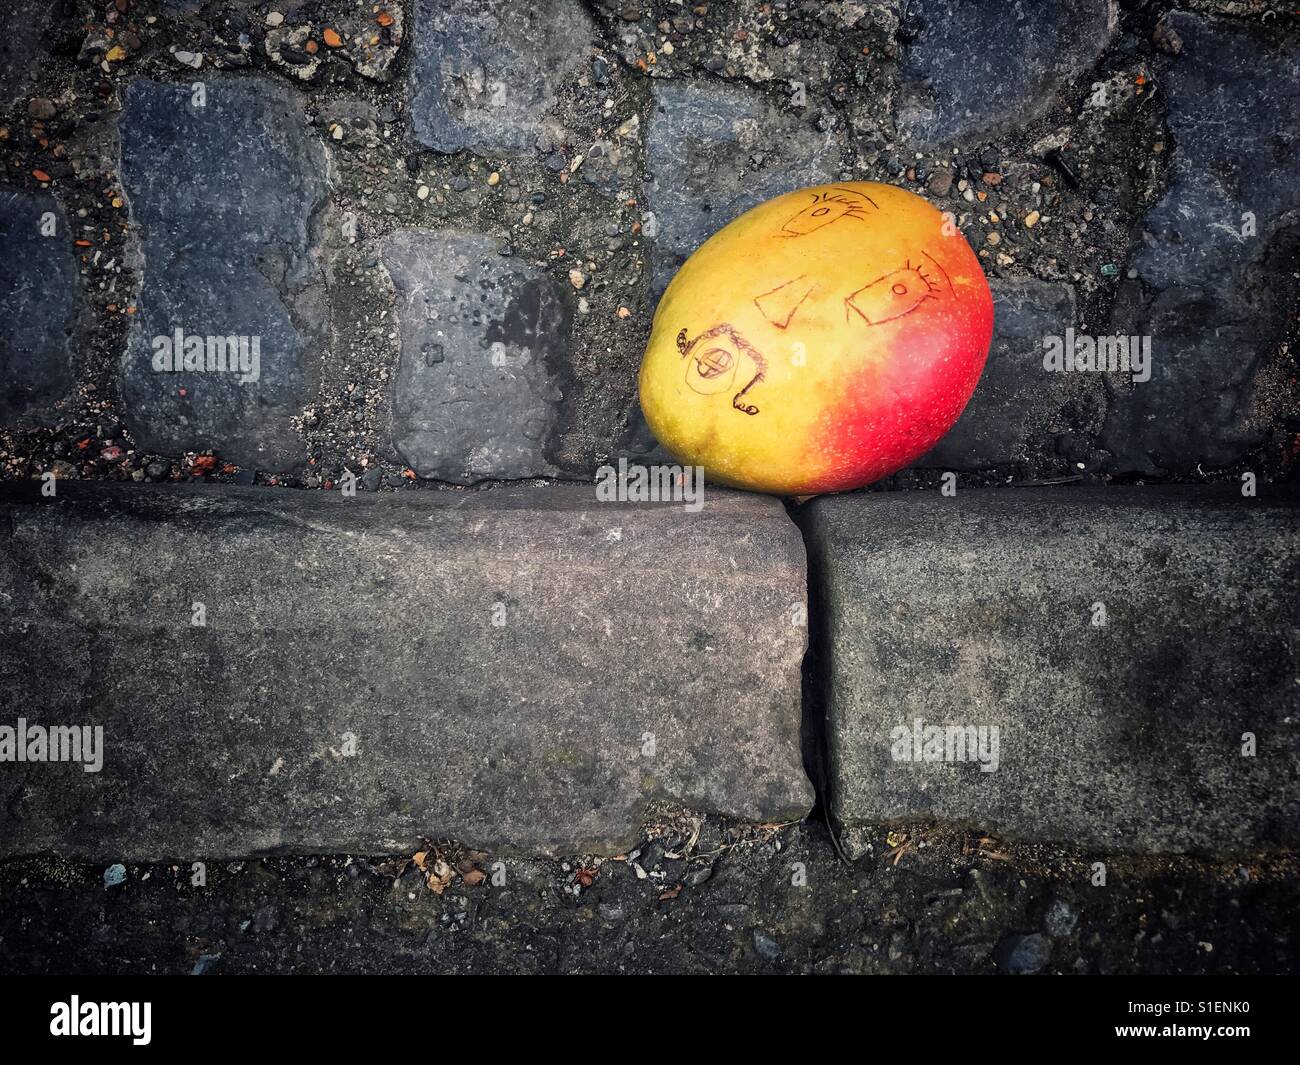 Mango with face drawn on it in the gutter of road Stock Photo